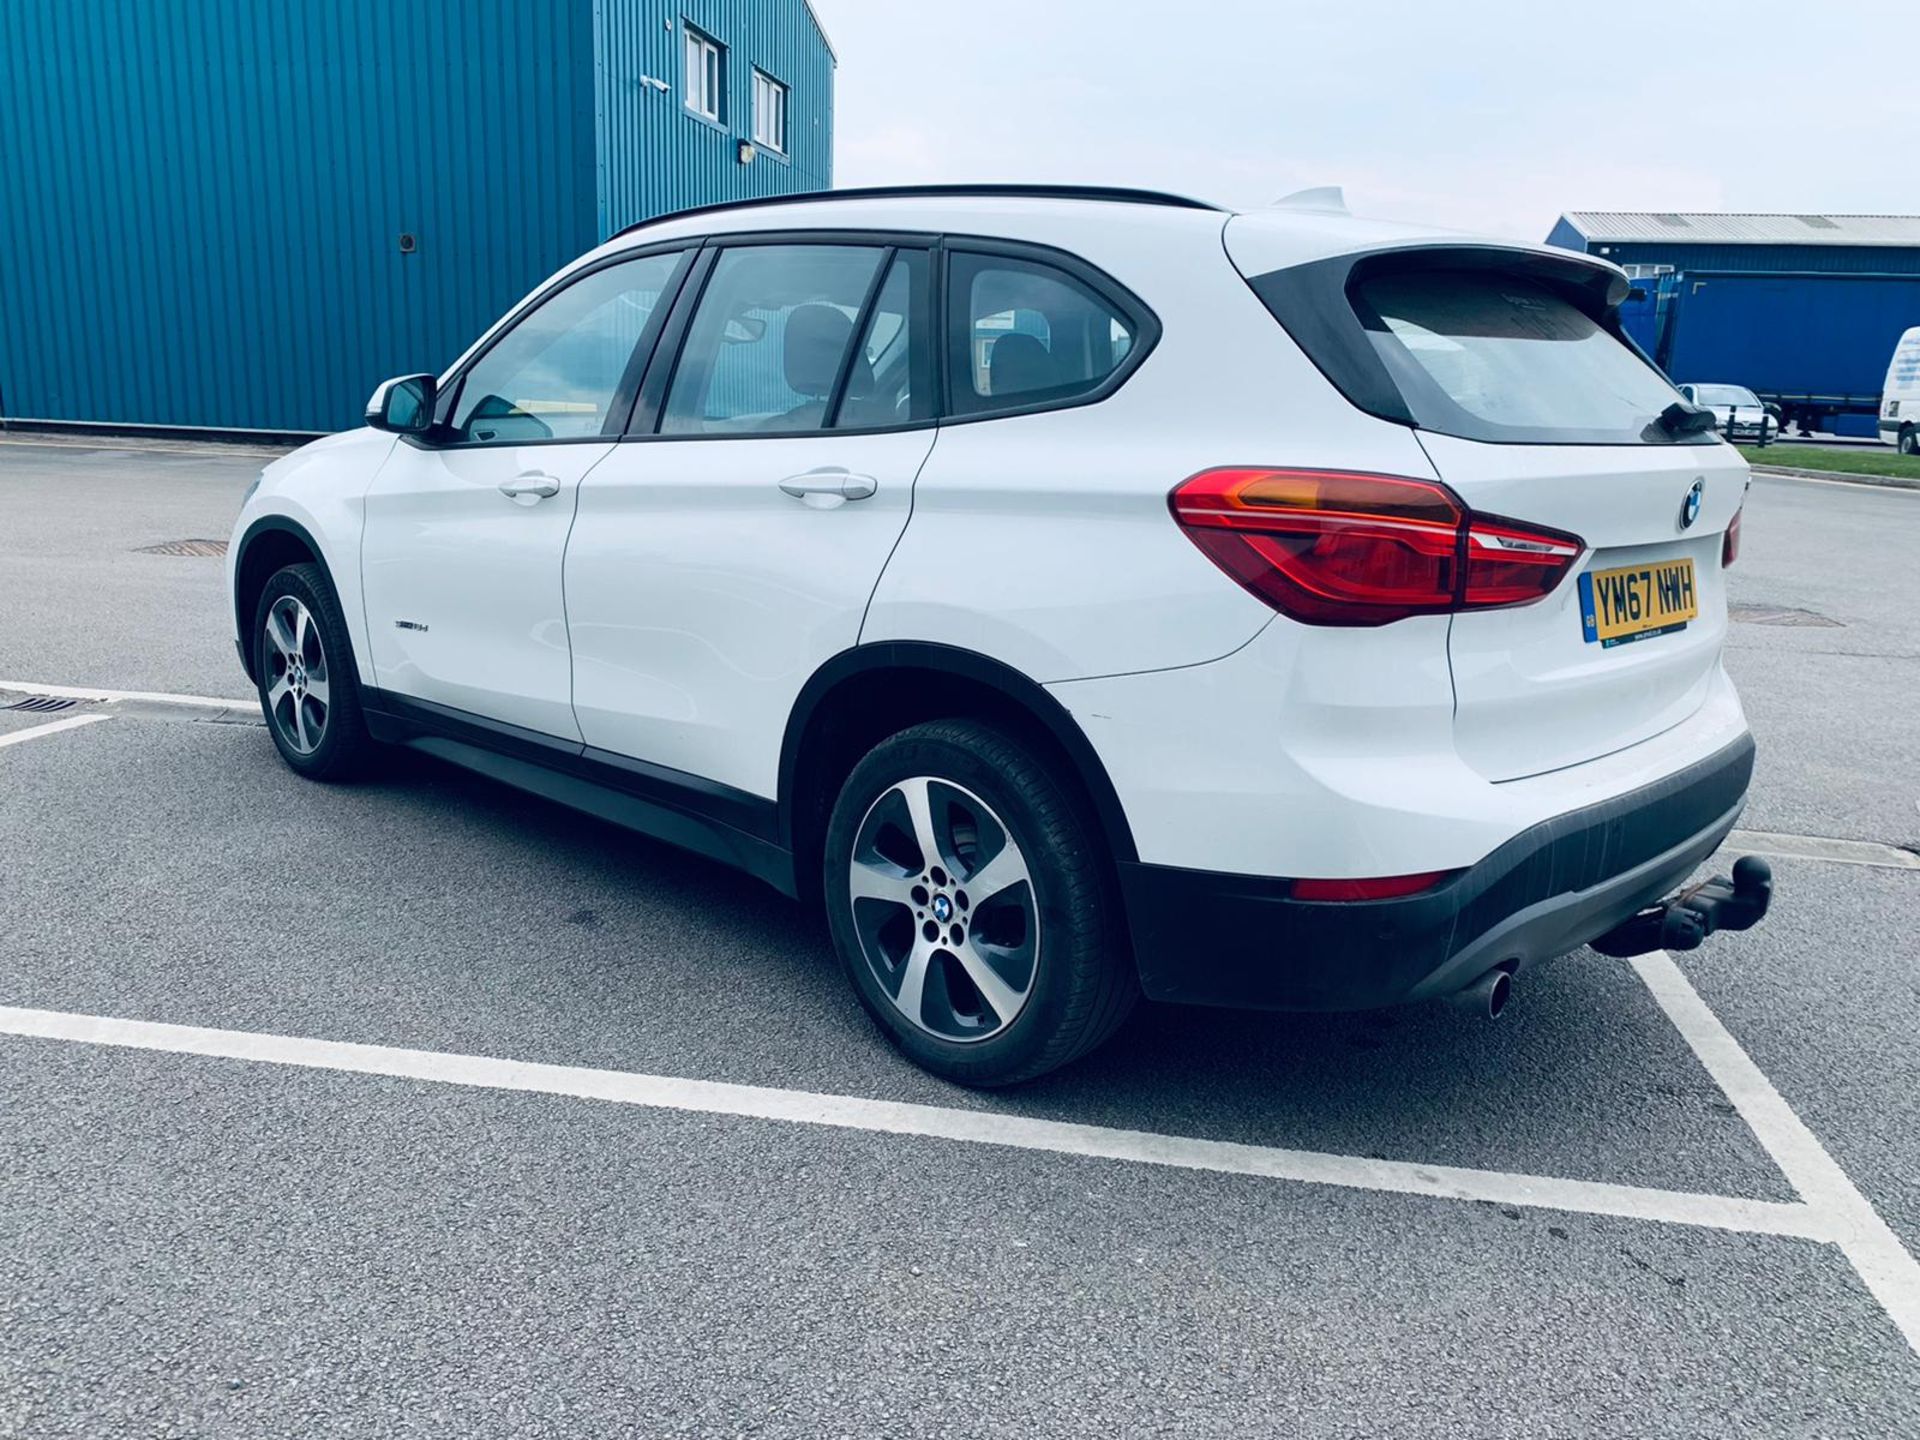 BMW X1 sDrive 2.0d Special Equipment Auto - 2018 Reg - Service History - 1 Owner From New - Image 6 of 25